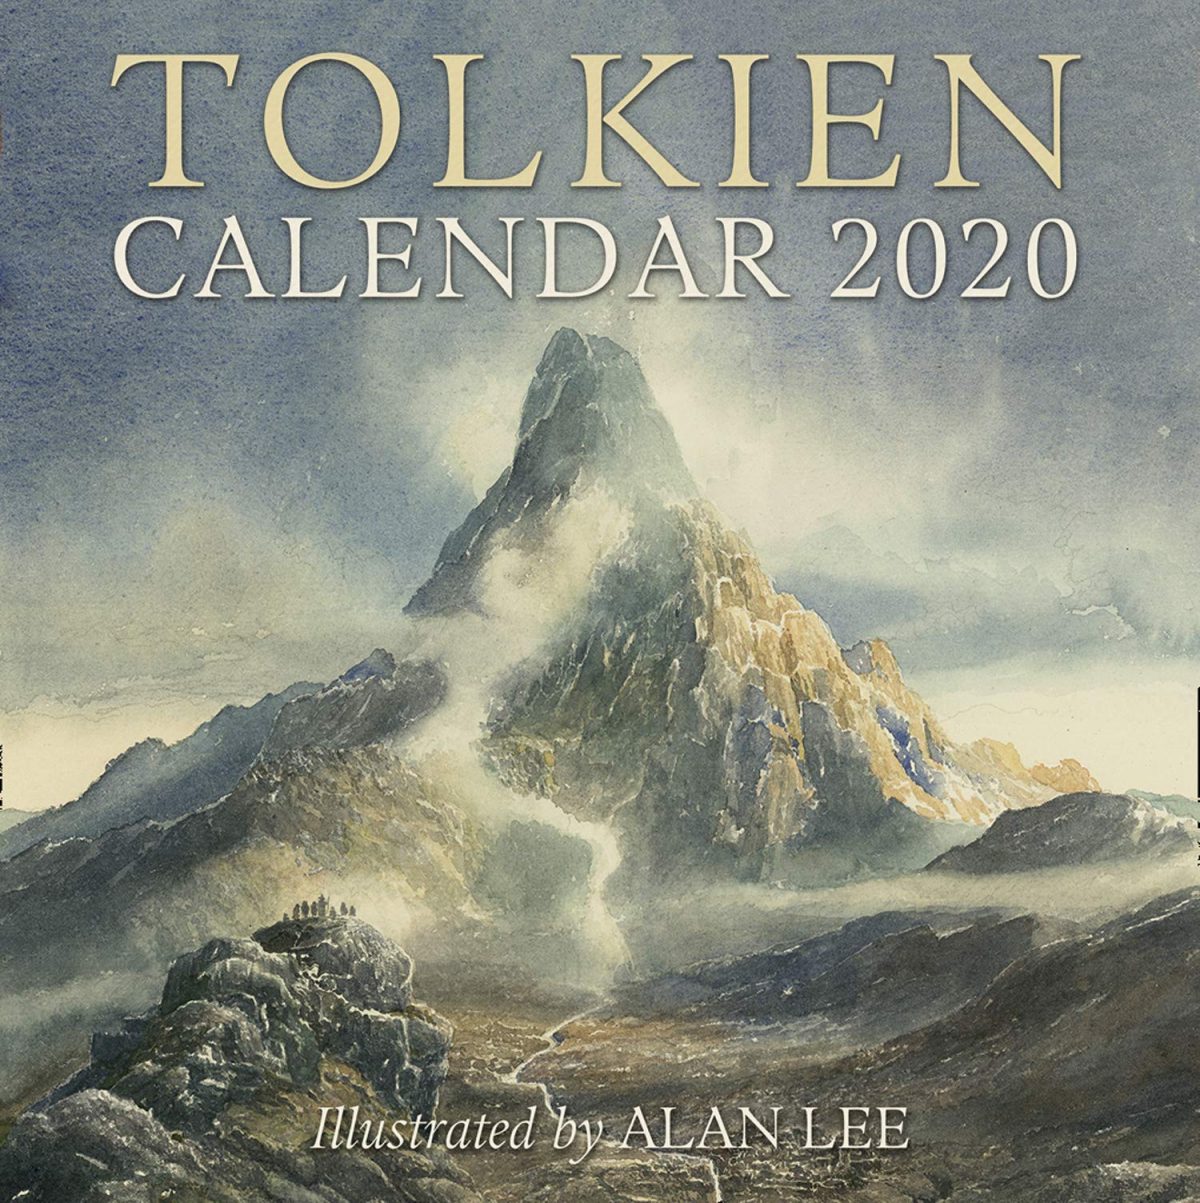 tolkien-calendar-2020-is-published-the-tolkien-society